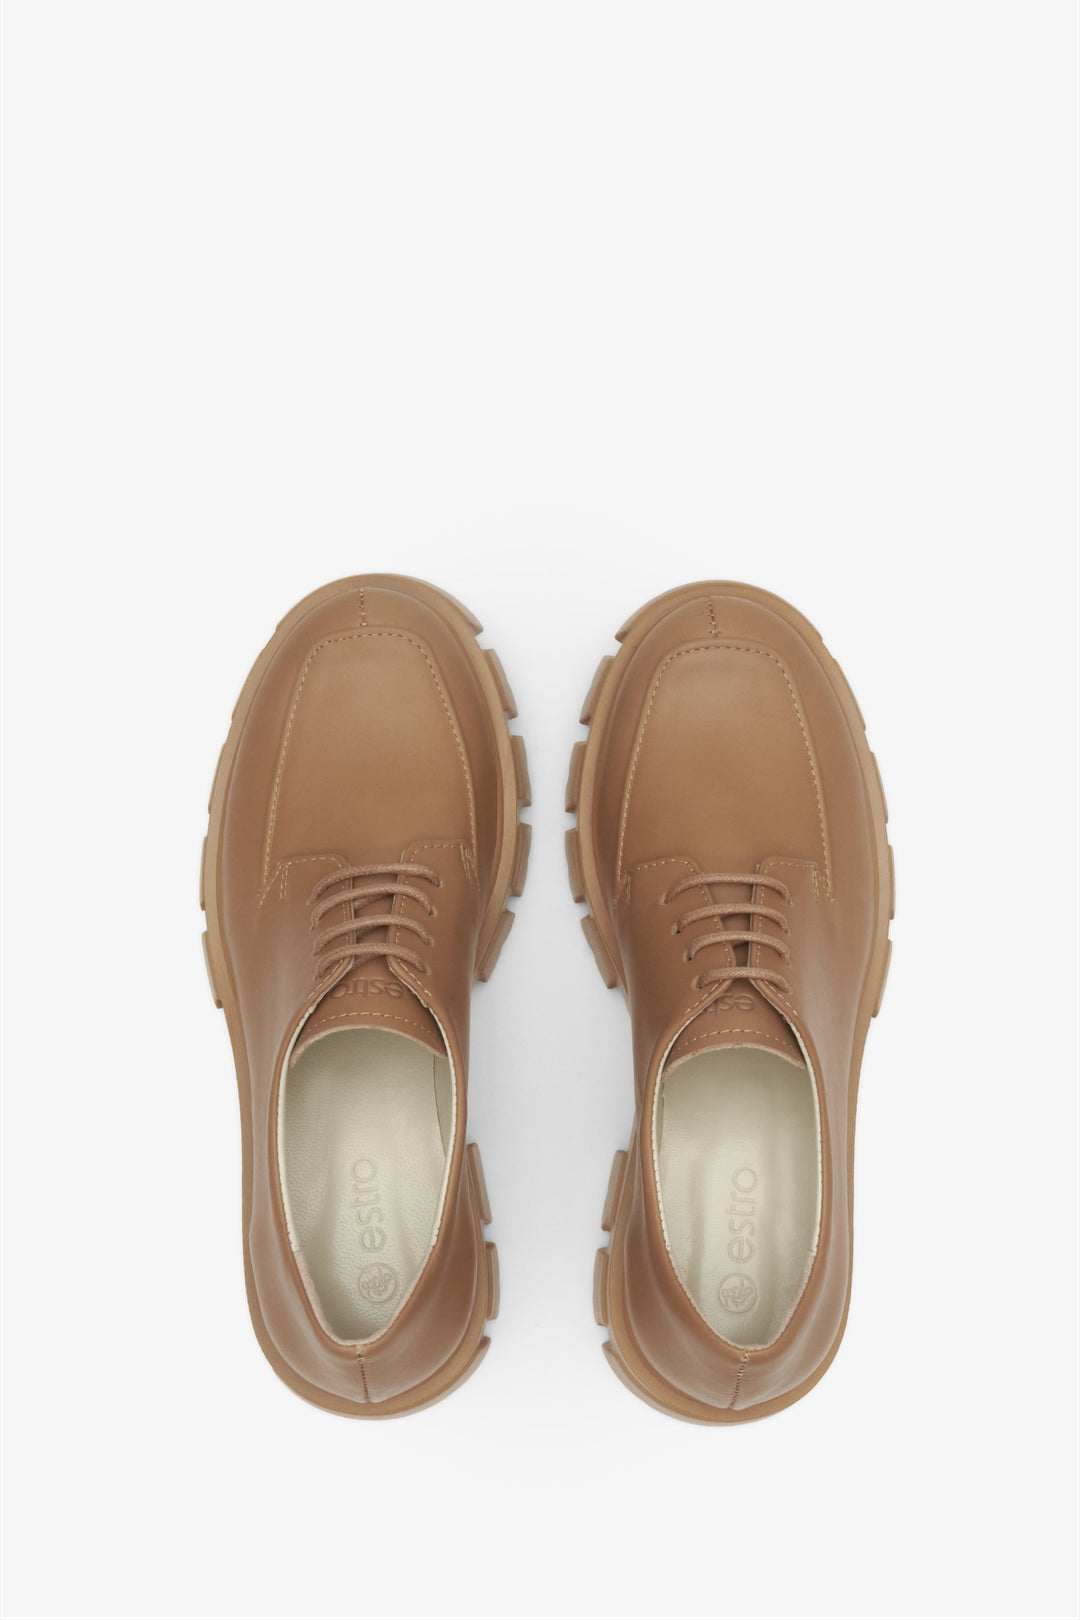 Lace-up women's leather shoes in brown - top view presentation of the footwear.